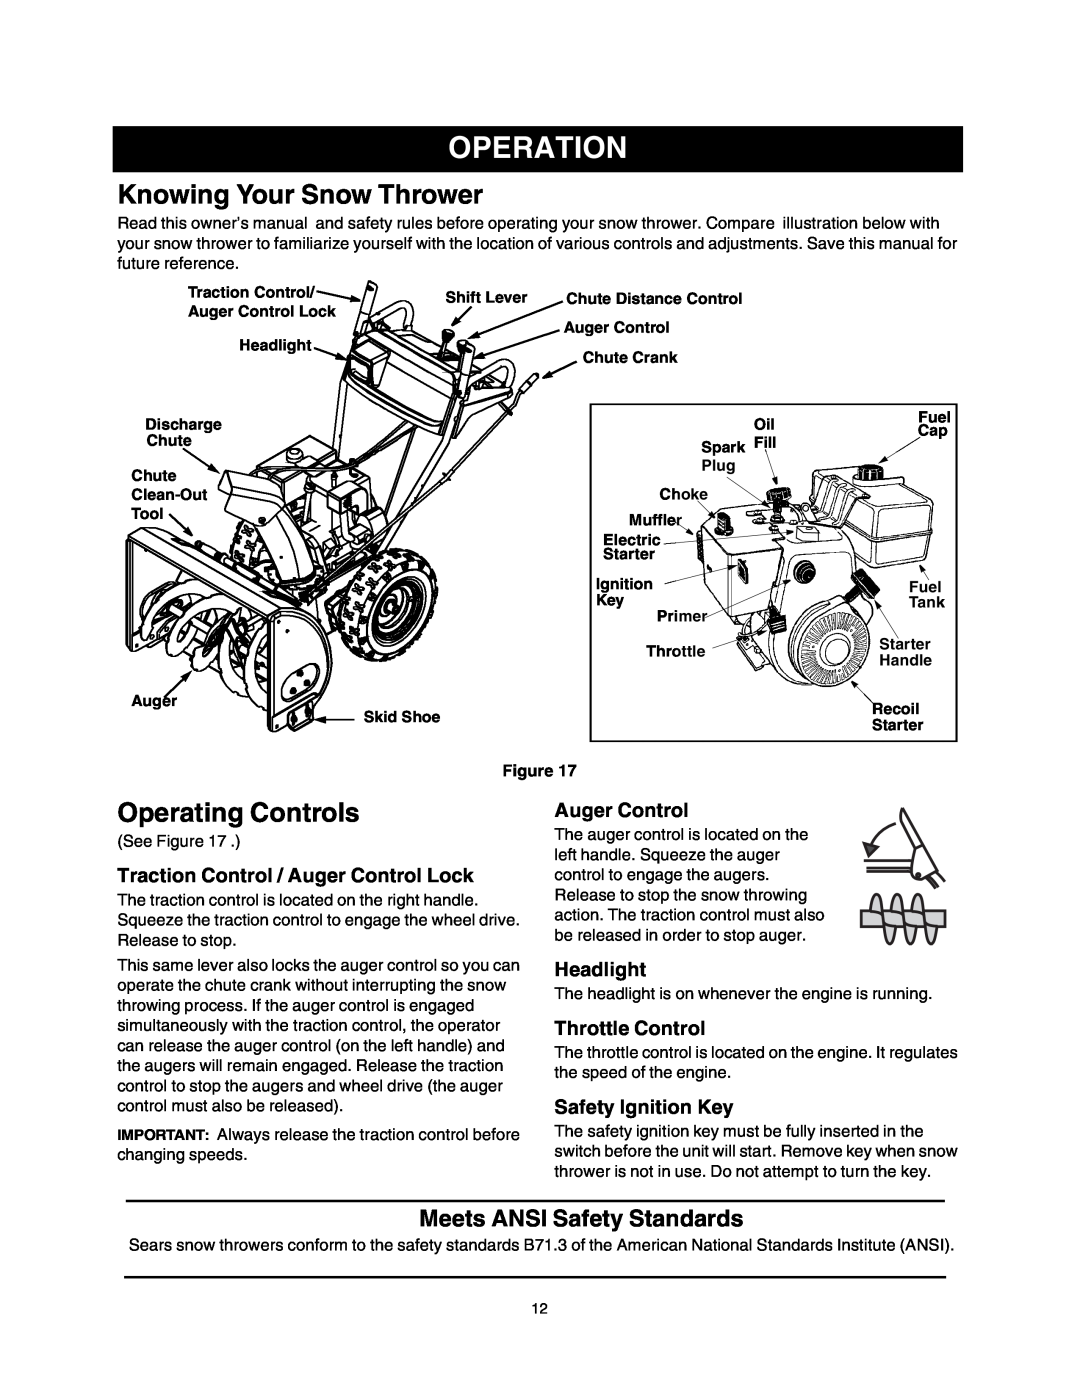 Sears 247.88853 Operation, Knowing Your Snow Thrower, Operating Controls, Meets ANSI Safety Standards, Auger Control 